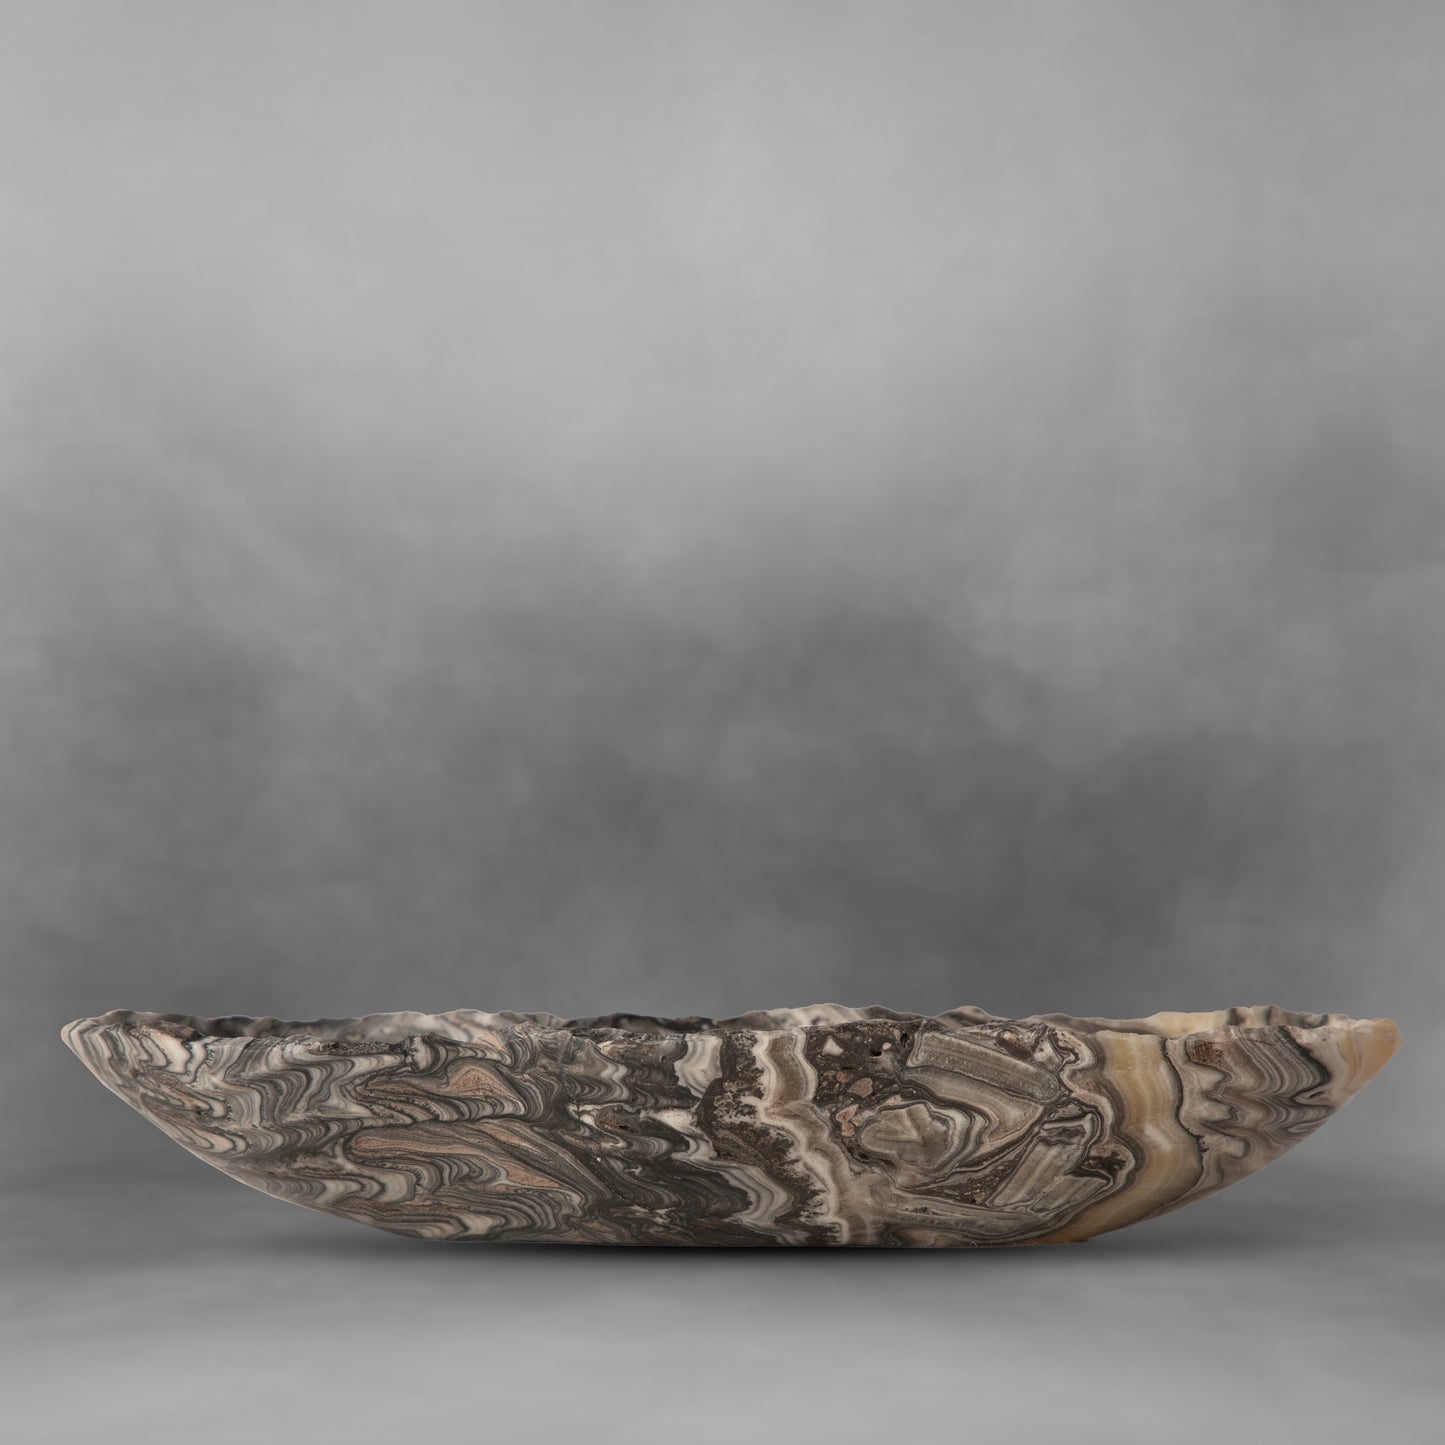 Natural stone art, abstract grays with brushstrokes of white, onyx candy bowl (small)